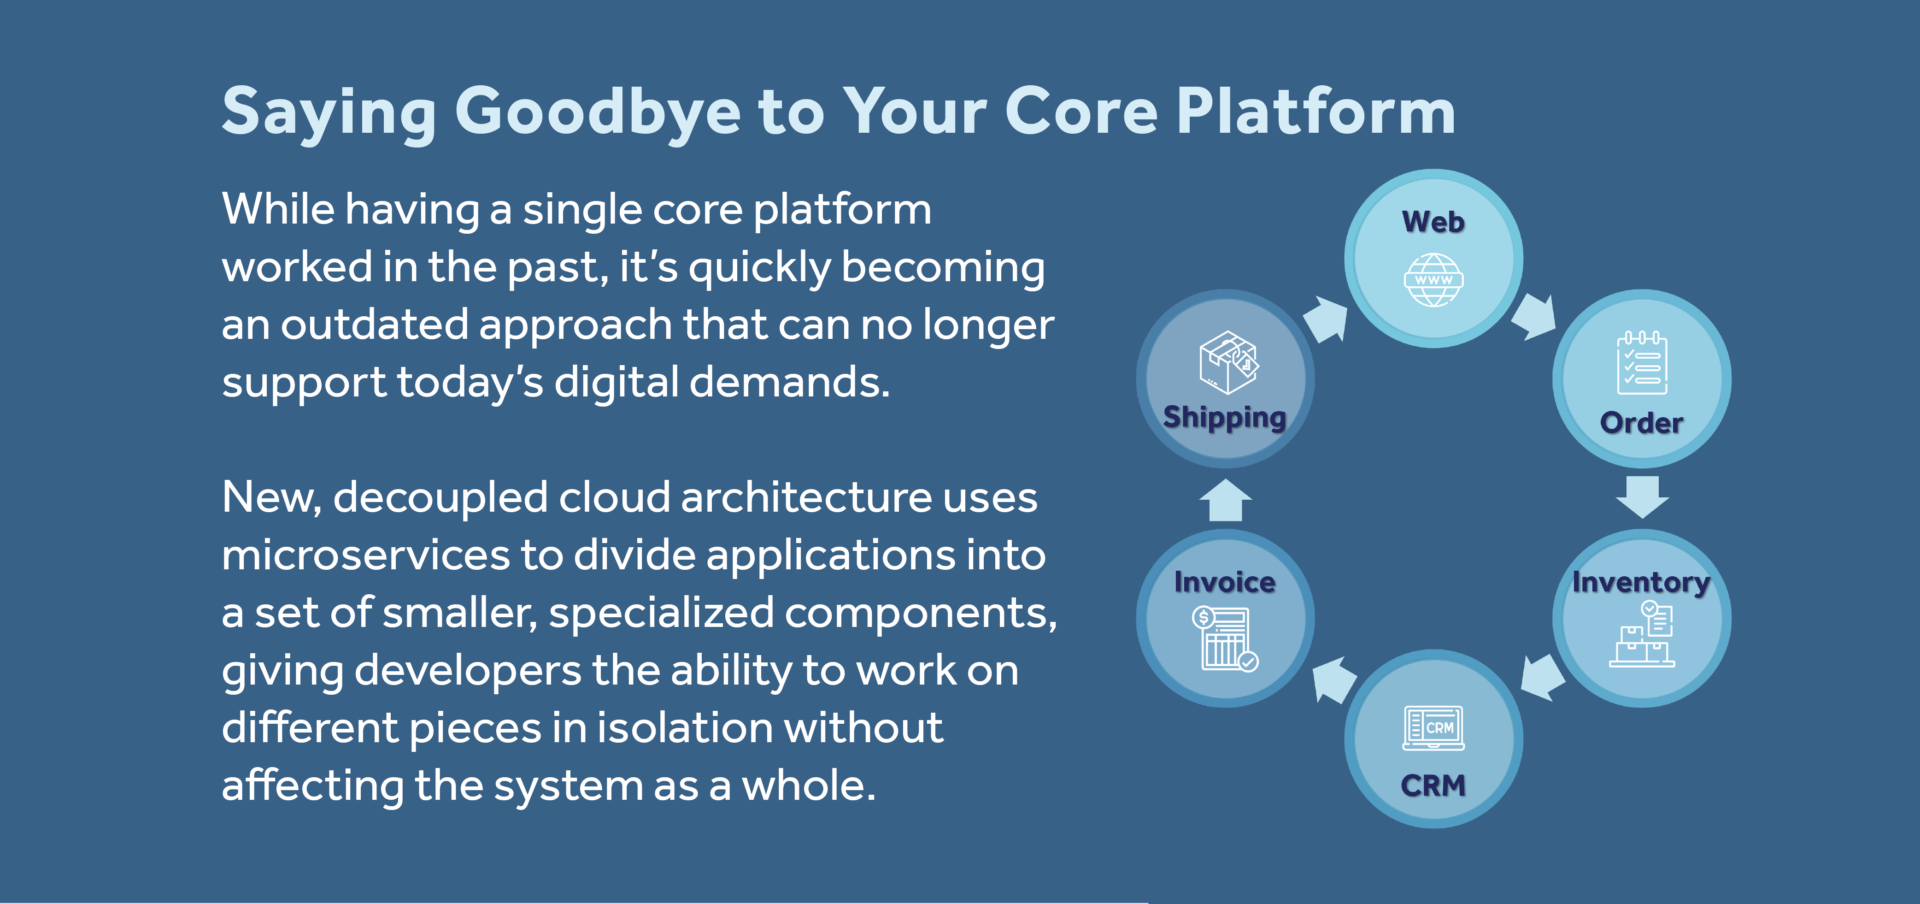 Saying Goodby to Your Core Platform